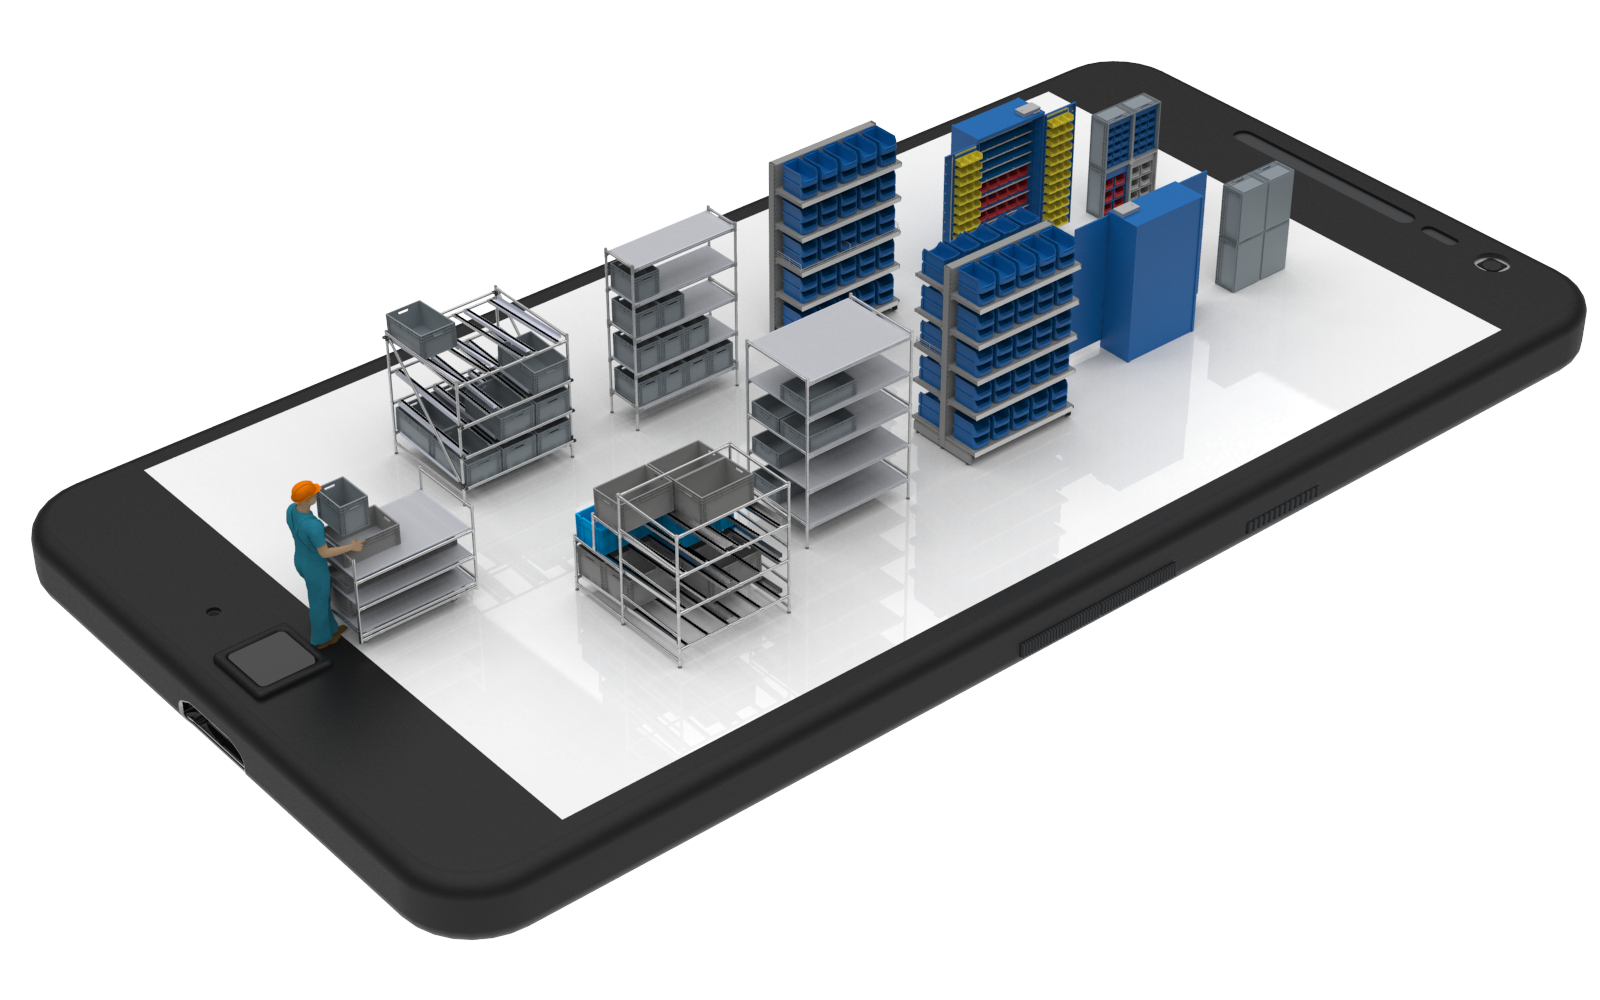 Storage Location Manager products